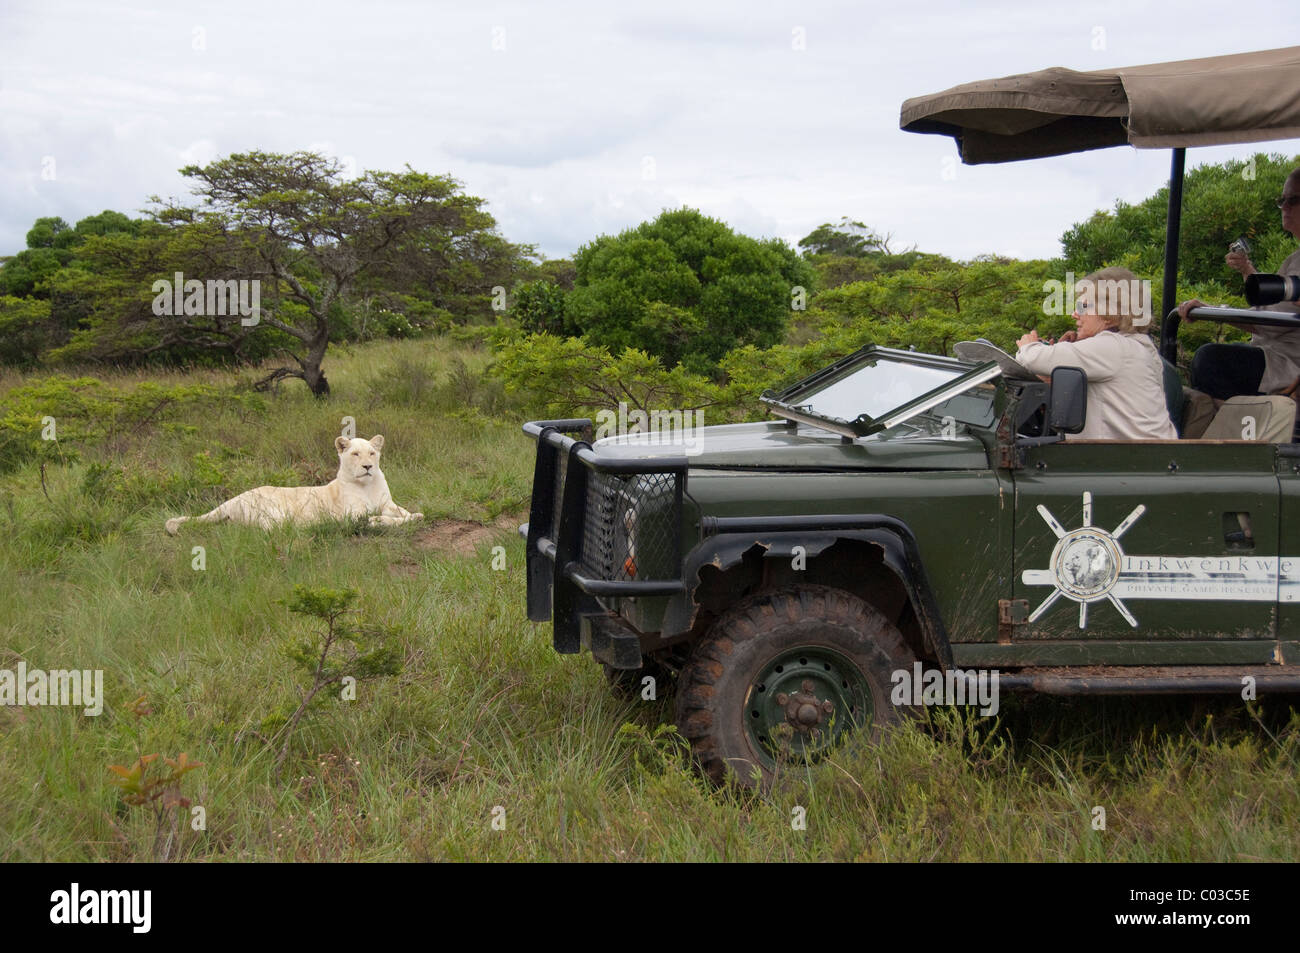 South Africa, Eastern Cape, East London, Inkwenkwezi Private Game Reserve. Safari jeep near white lioness. Stock Photo